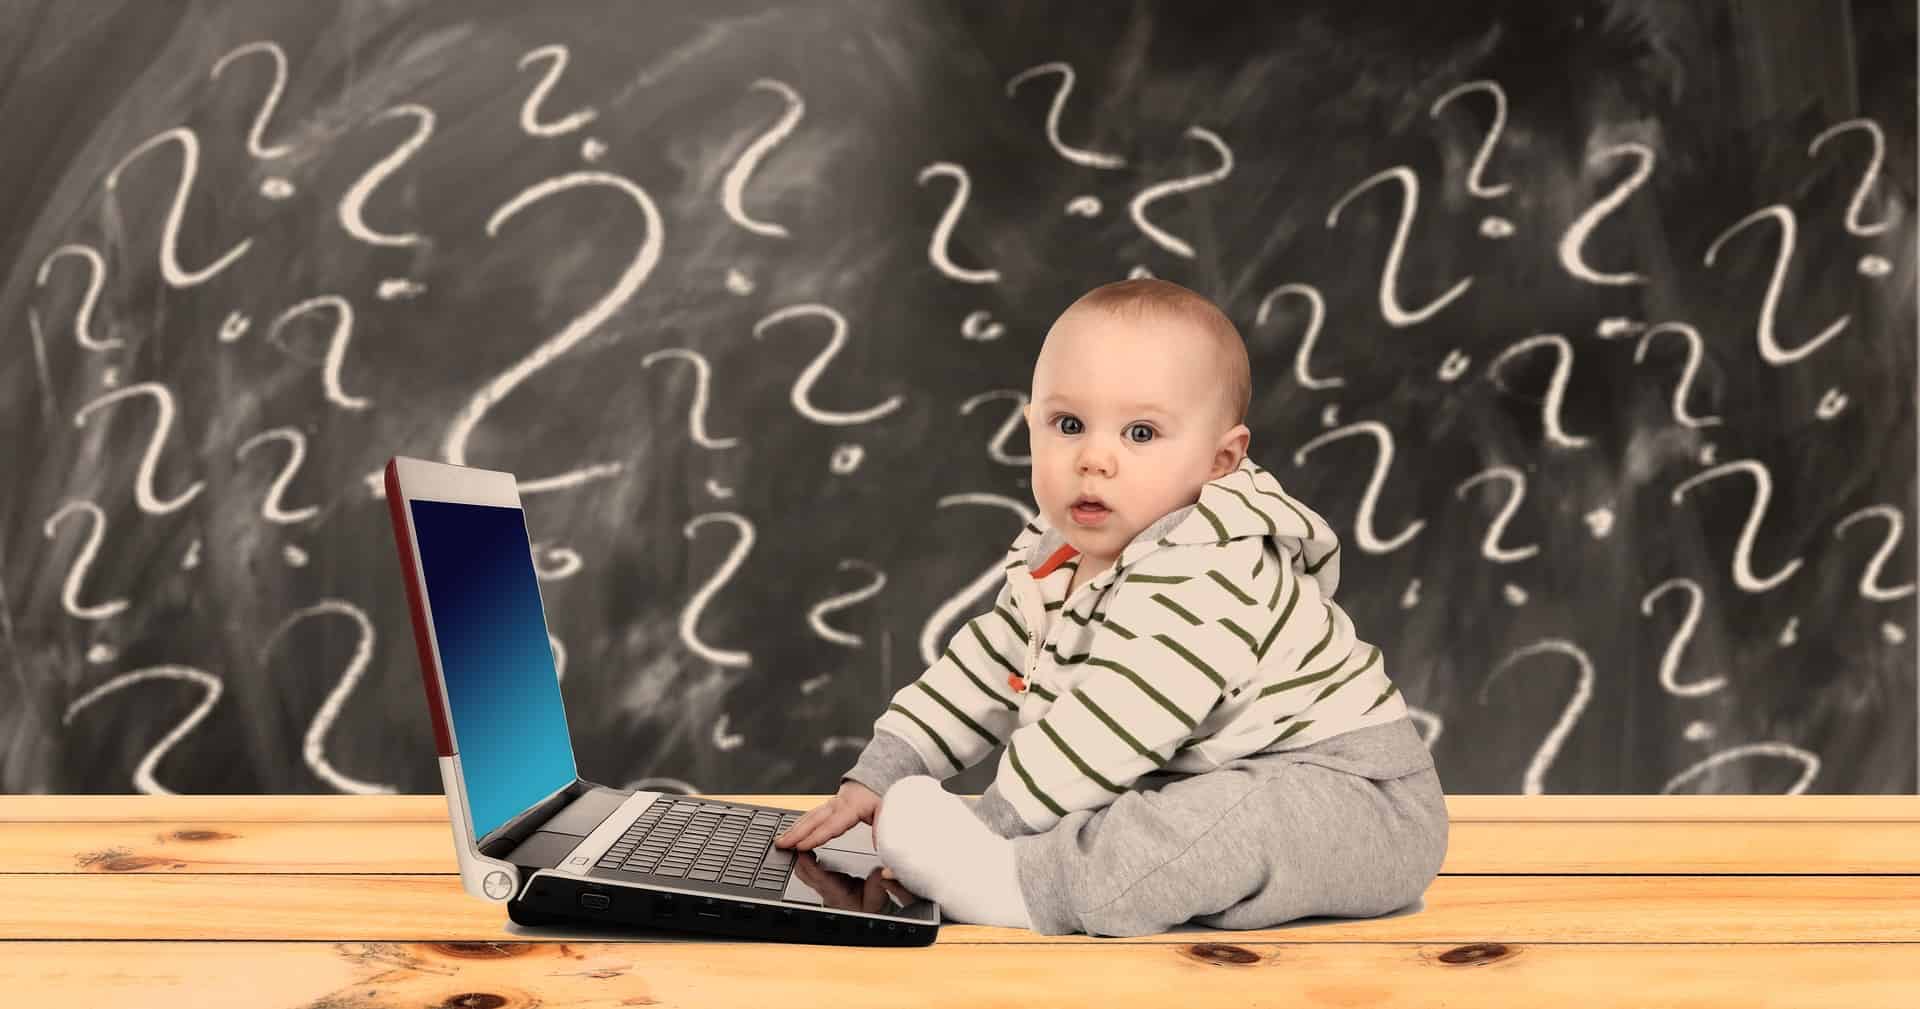 Infant sitting at a laptop with question marks behind him